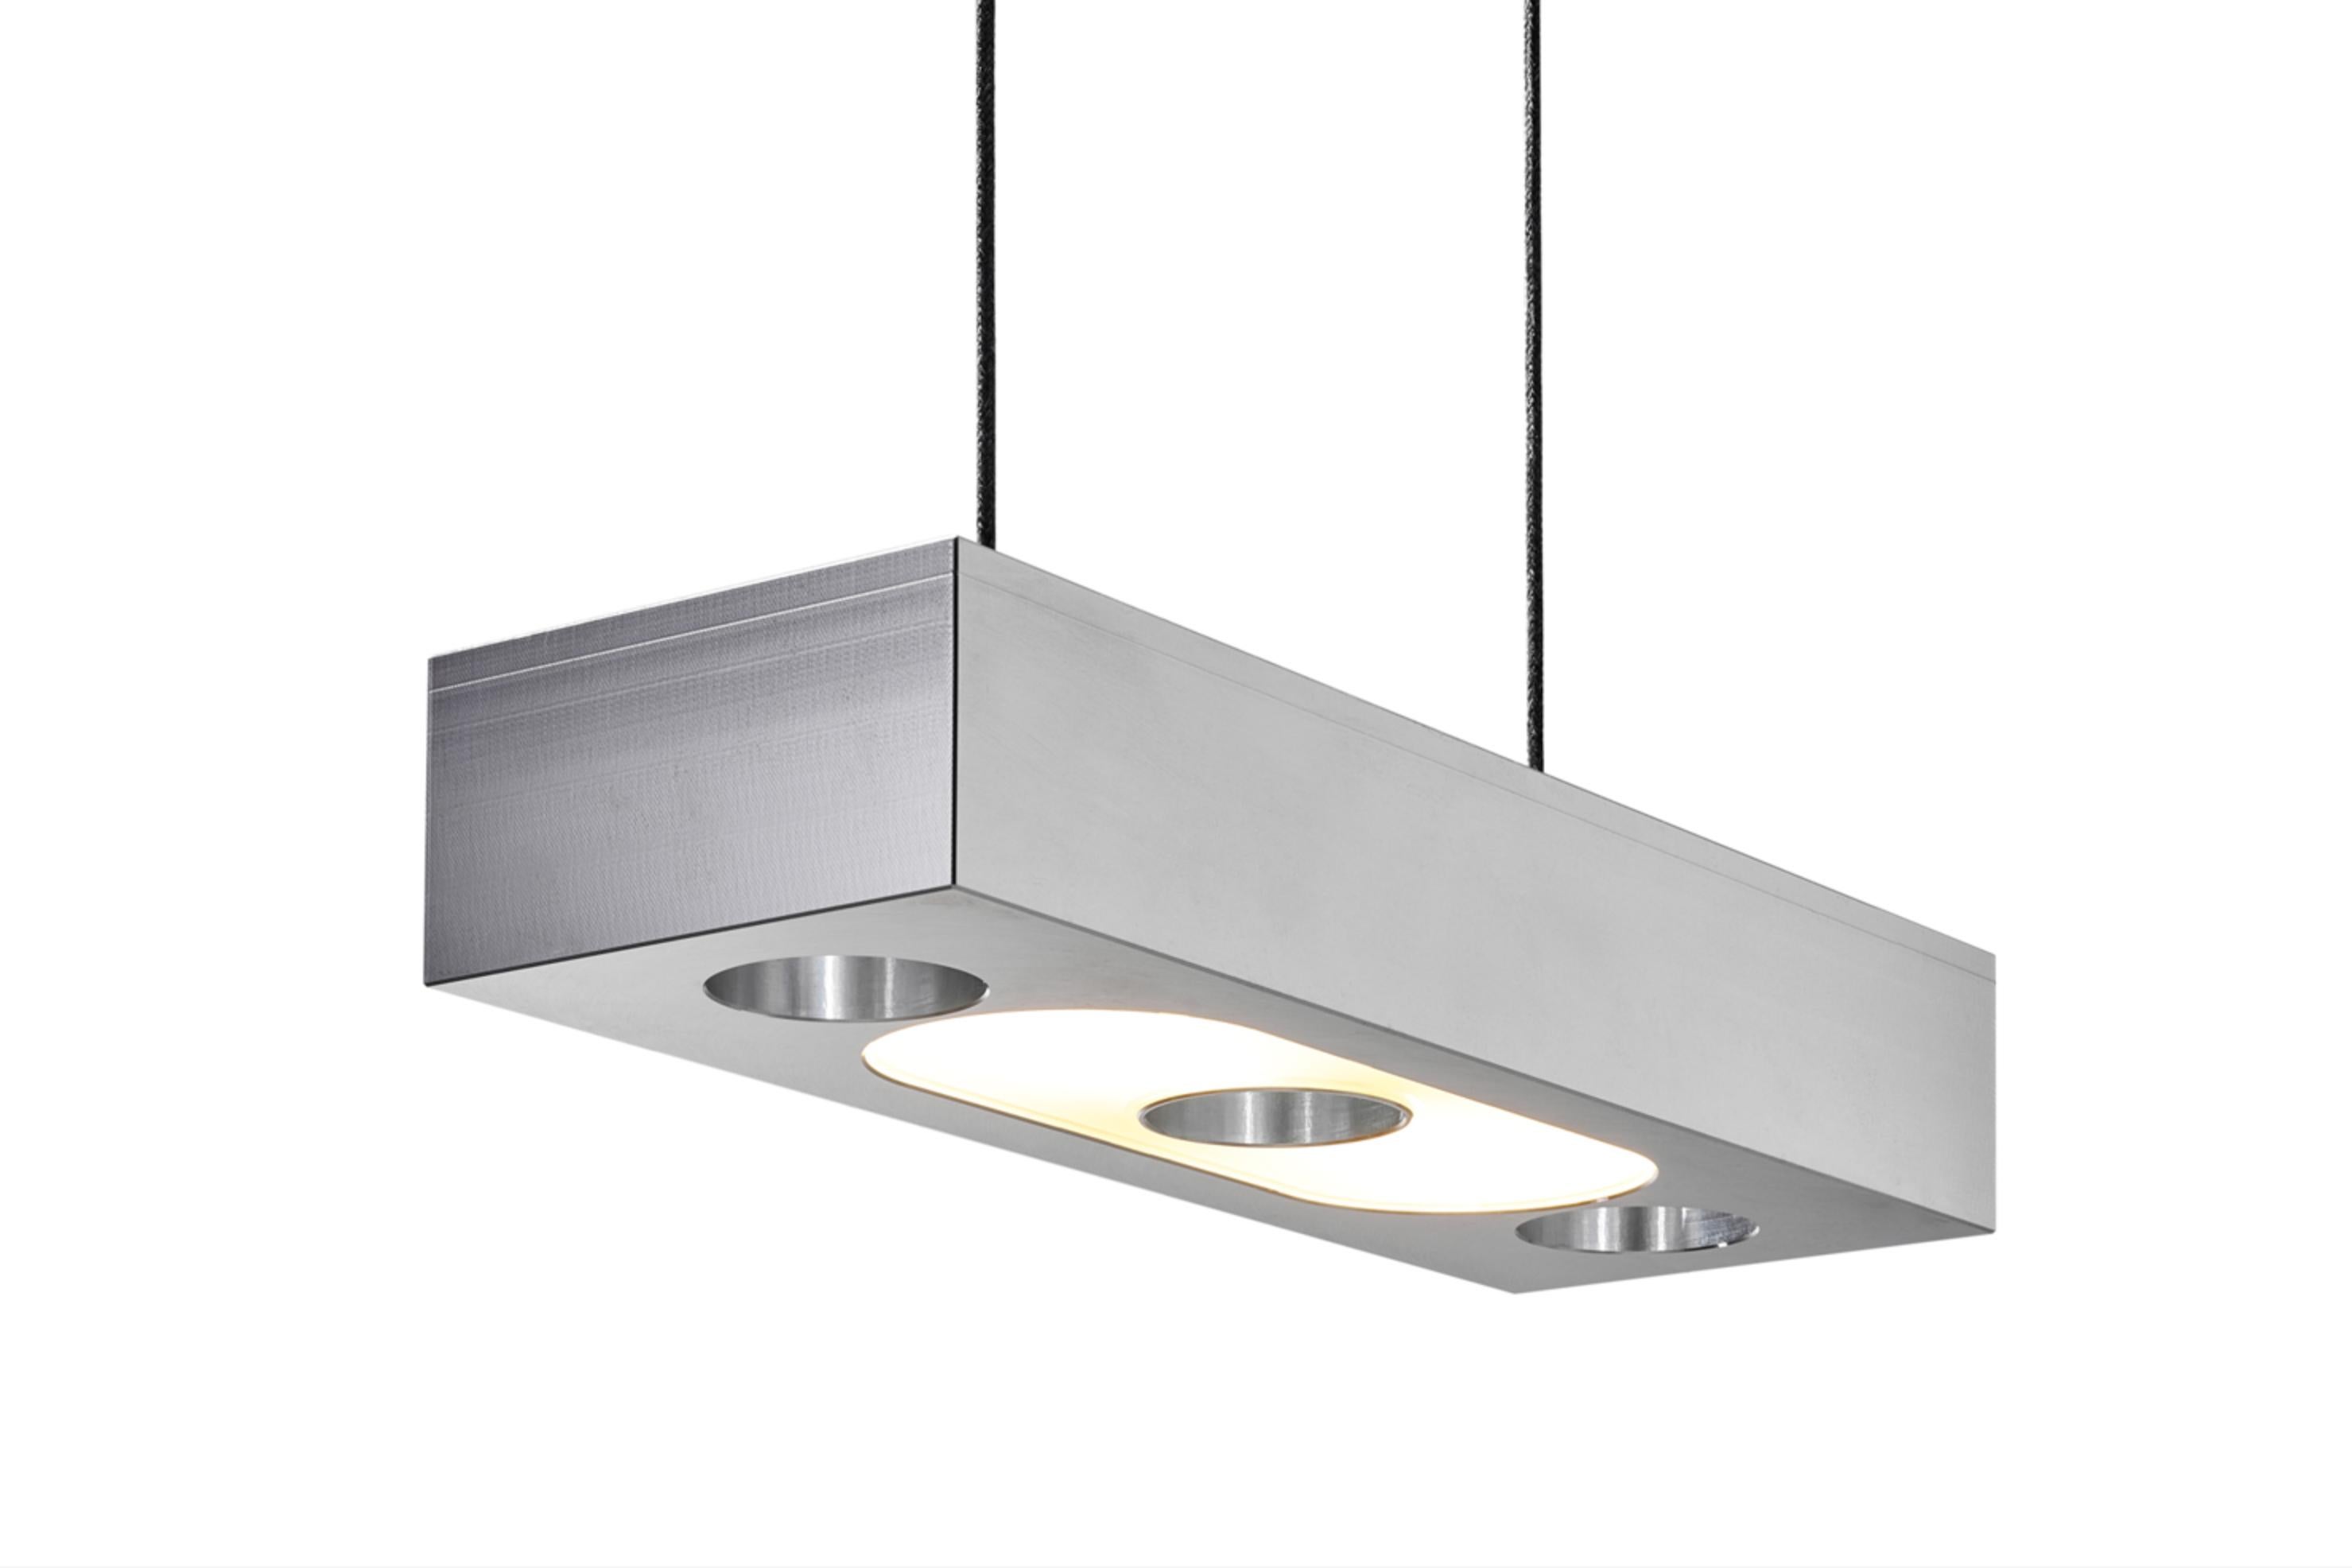 Aluminium Oblivion suspended light by Lexavala
Dimensions: W 18 x D 6 x H 3 cm 
Materials: Aluminium

Ultimate final touch in every lighting design. The brightest little detail to your home. Outstanding craftmanship combined.

Hello! My name